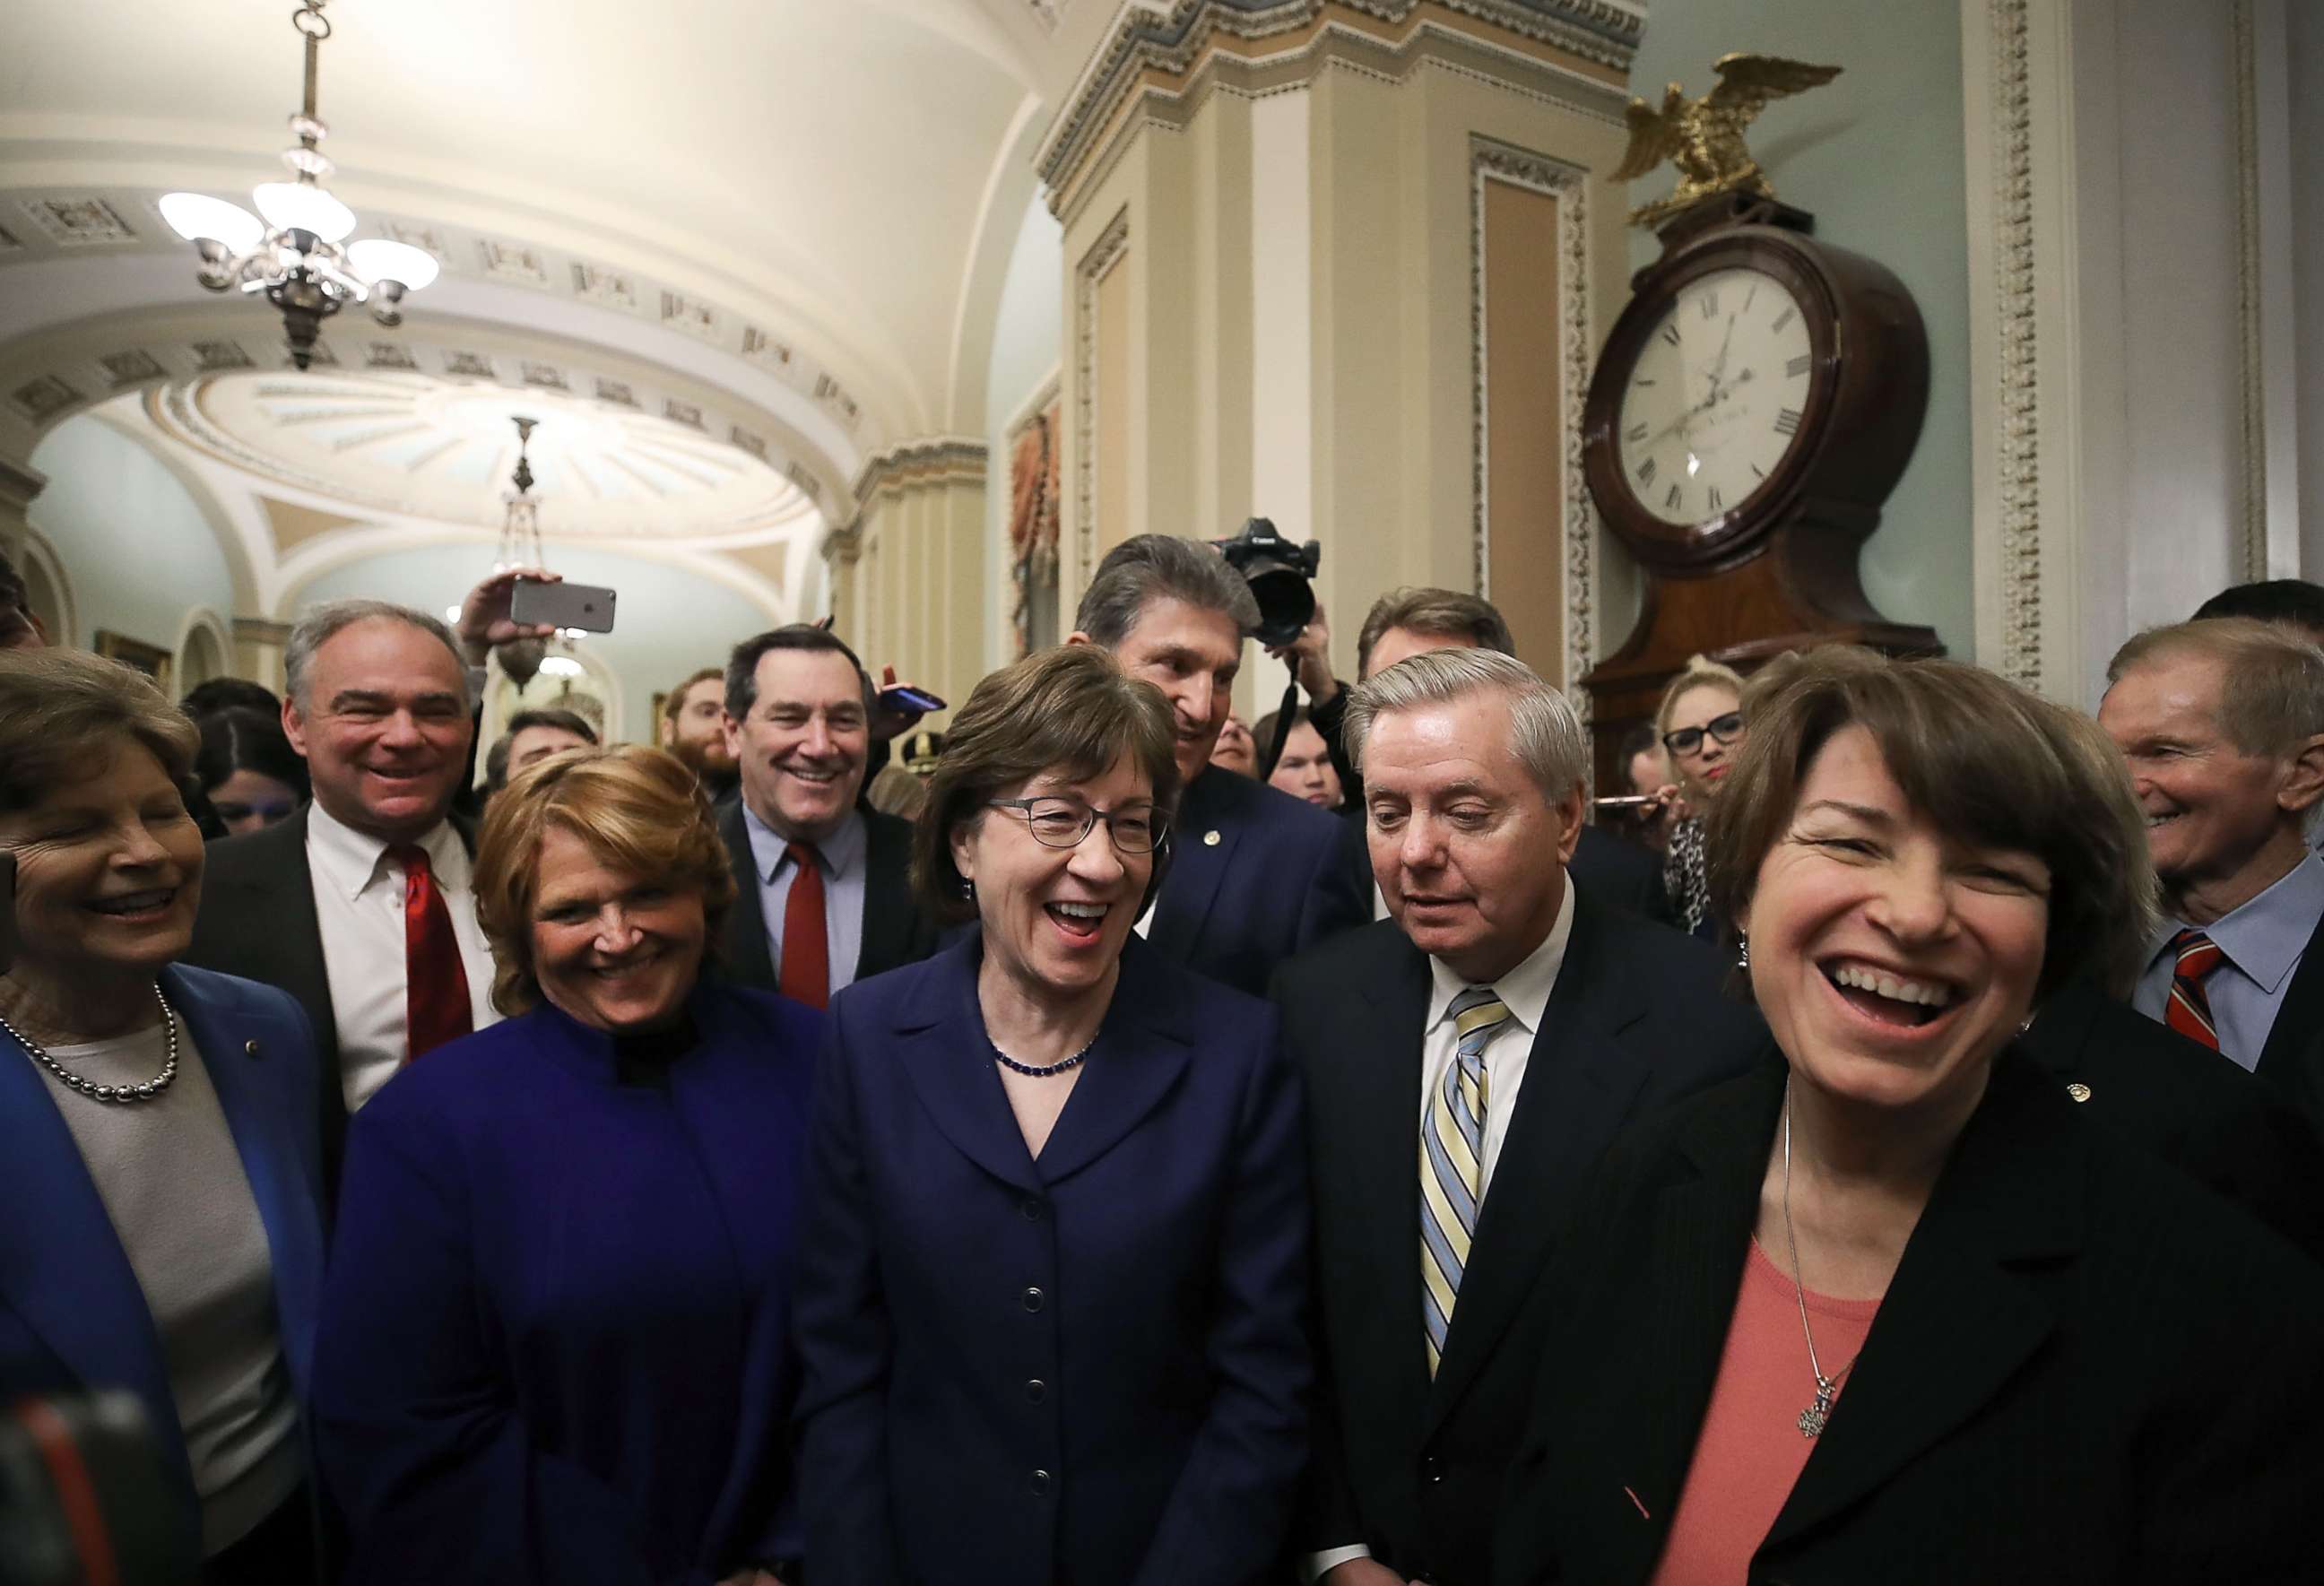 PHOTO: Sen. Susan Collins stands with Sen. Lindsey Graham and other fellow Senators after the Senate voted and passed a resolution to reopen the government, at the U.S. Capitol on Jan. 22, 2018 in Washington.